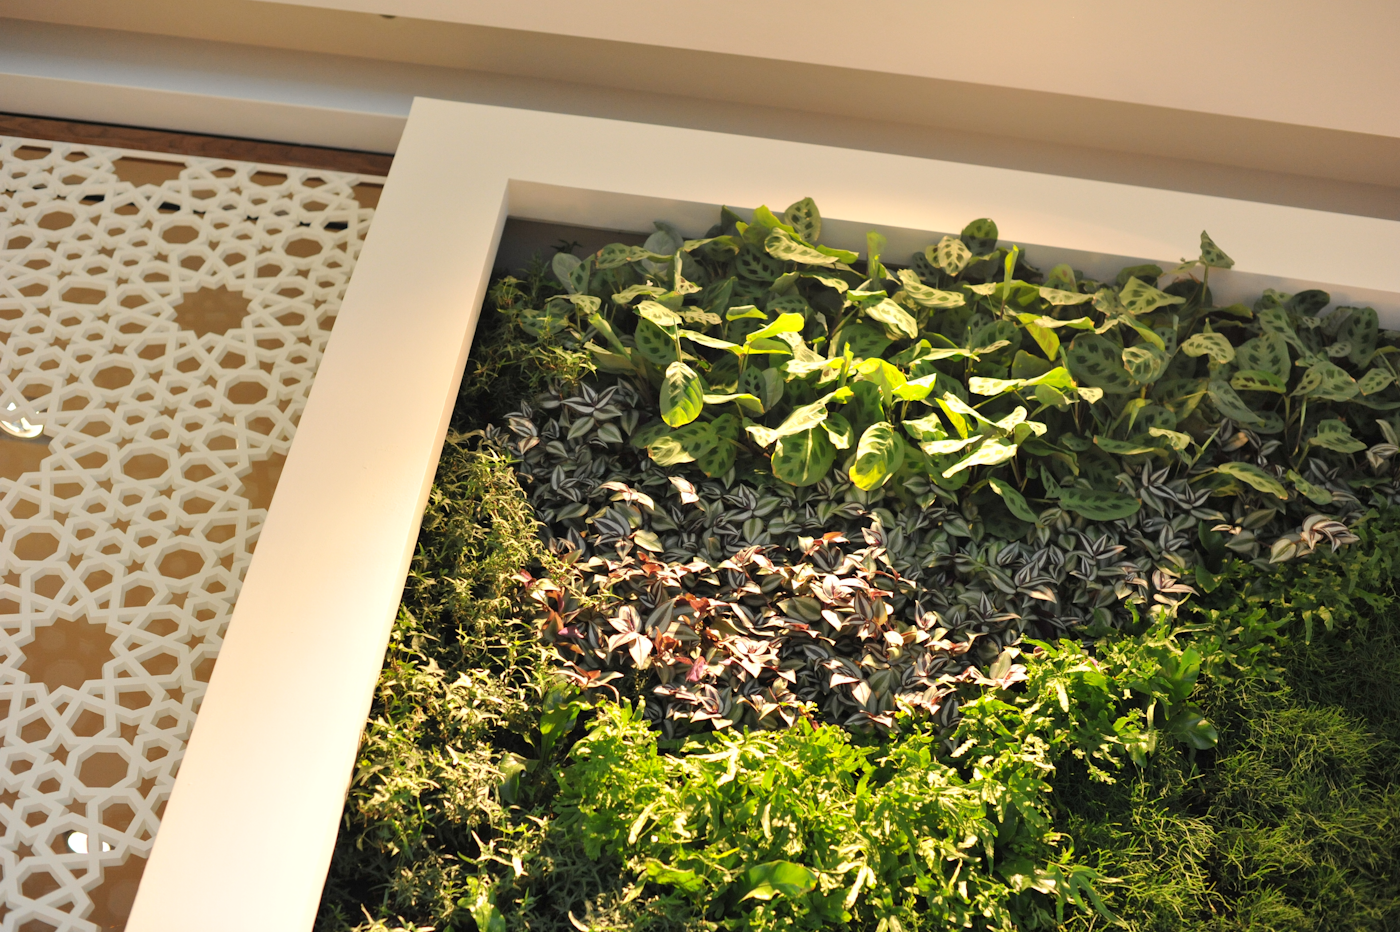 looking up a vertical garden with indoor plants in an airport entrance way lounge area